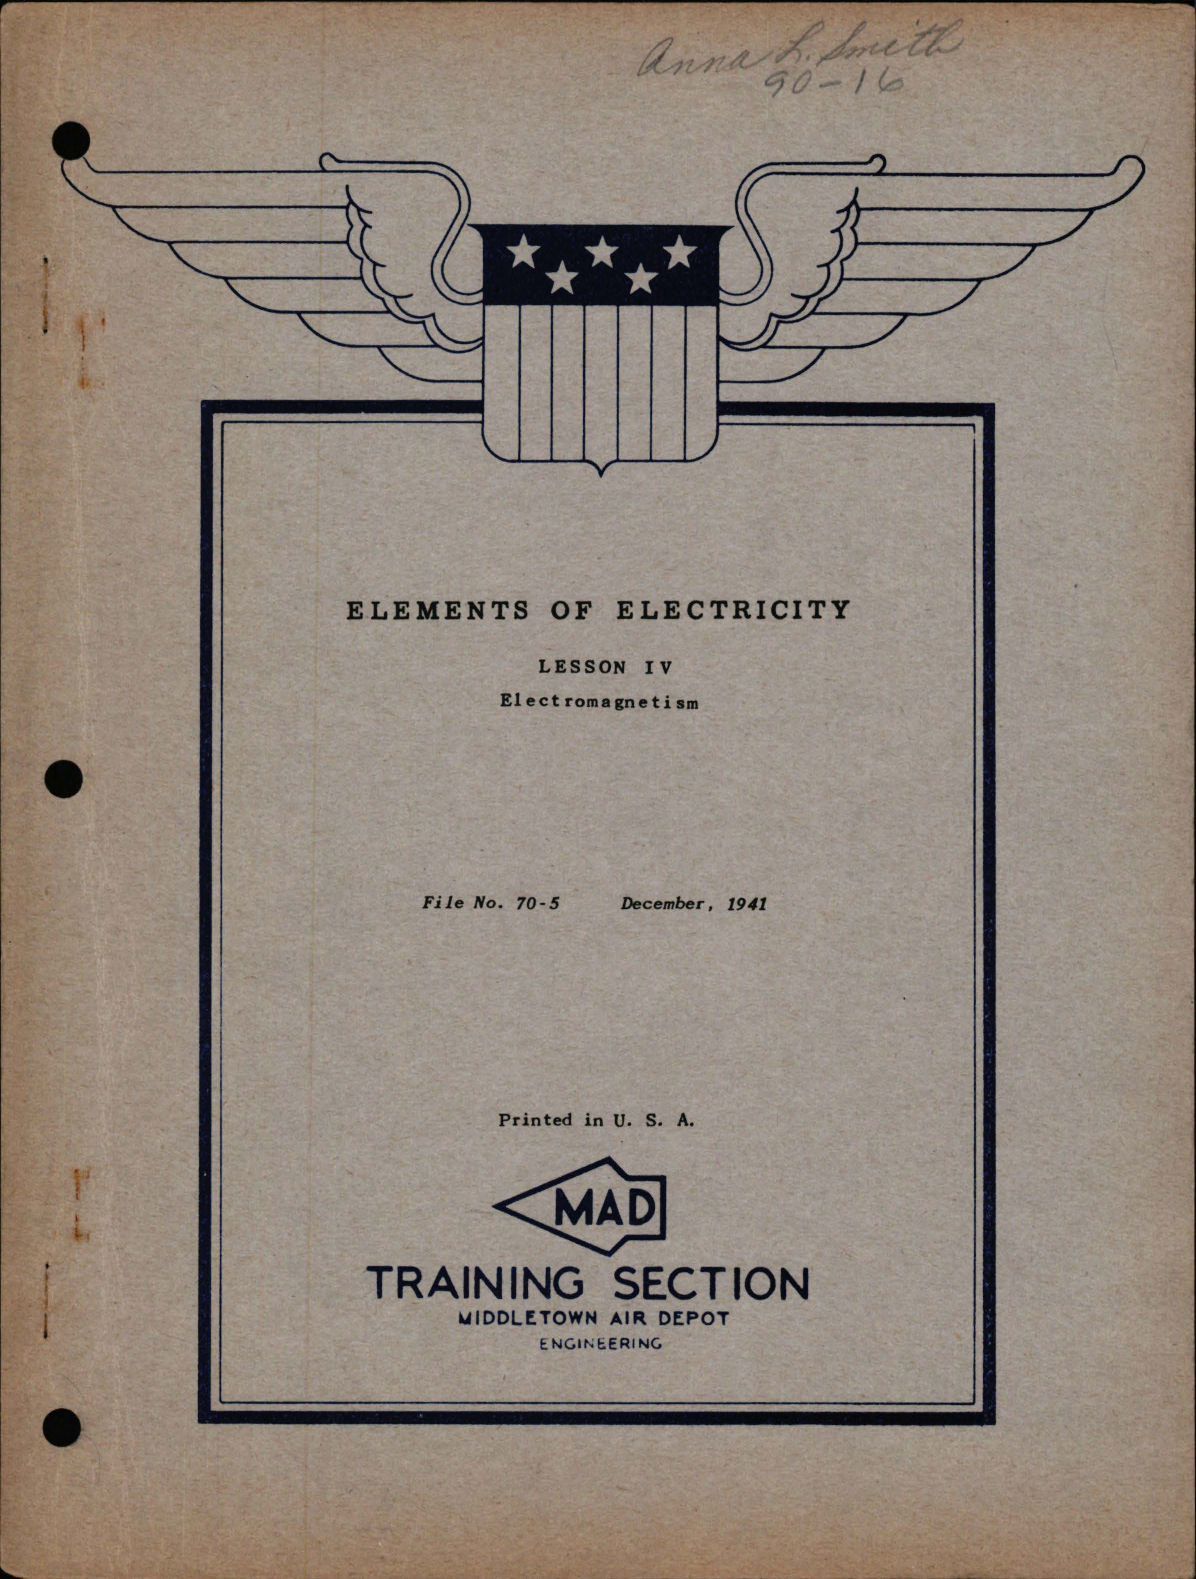 Sample page 1 from AirCorps Library document: Elements of Electricity for Electromagnetism - Lesson IV